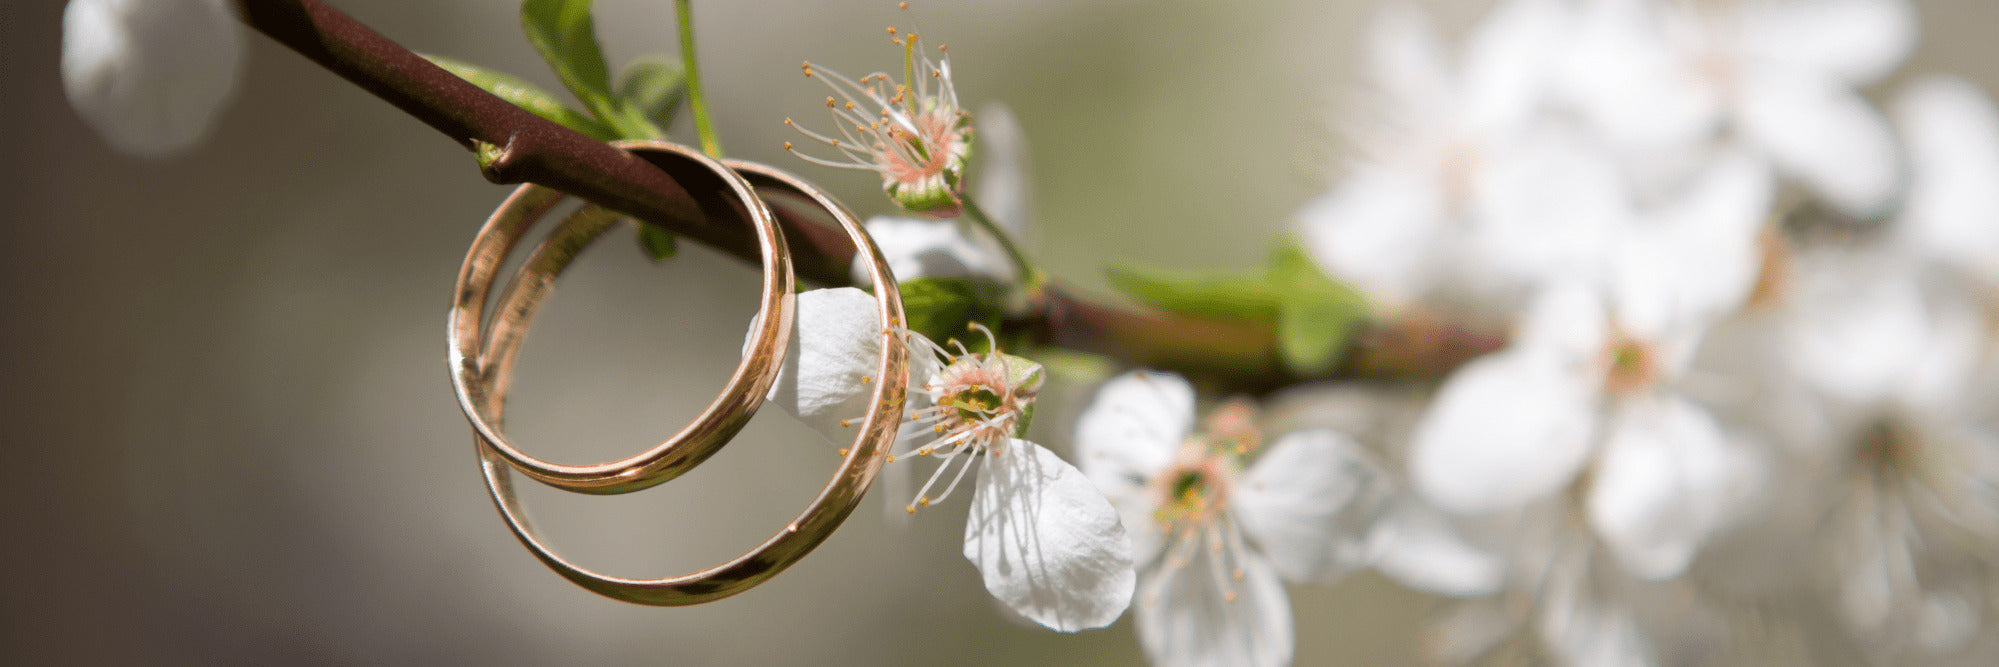 2 rings hang on a cherry blossom branch